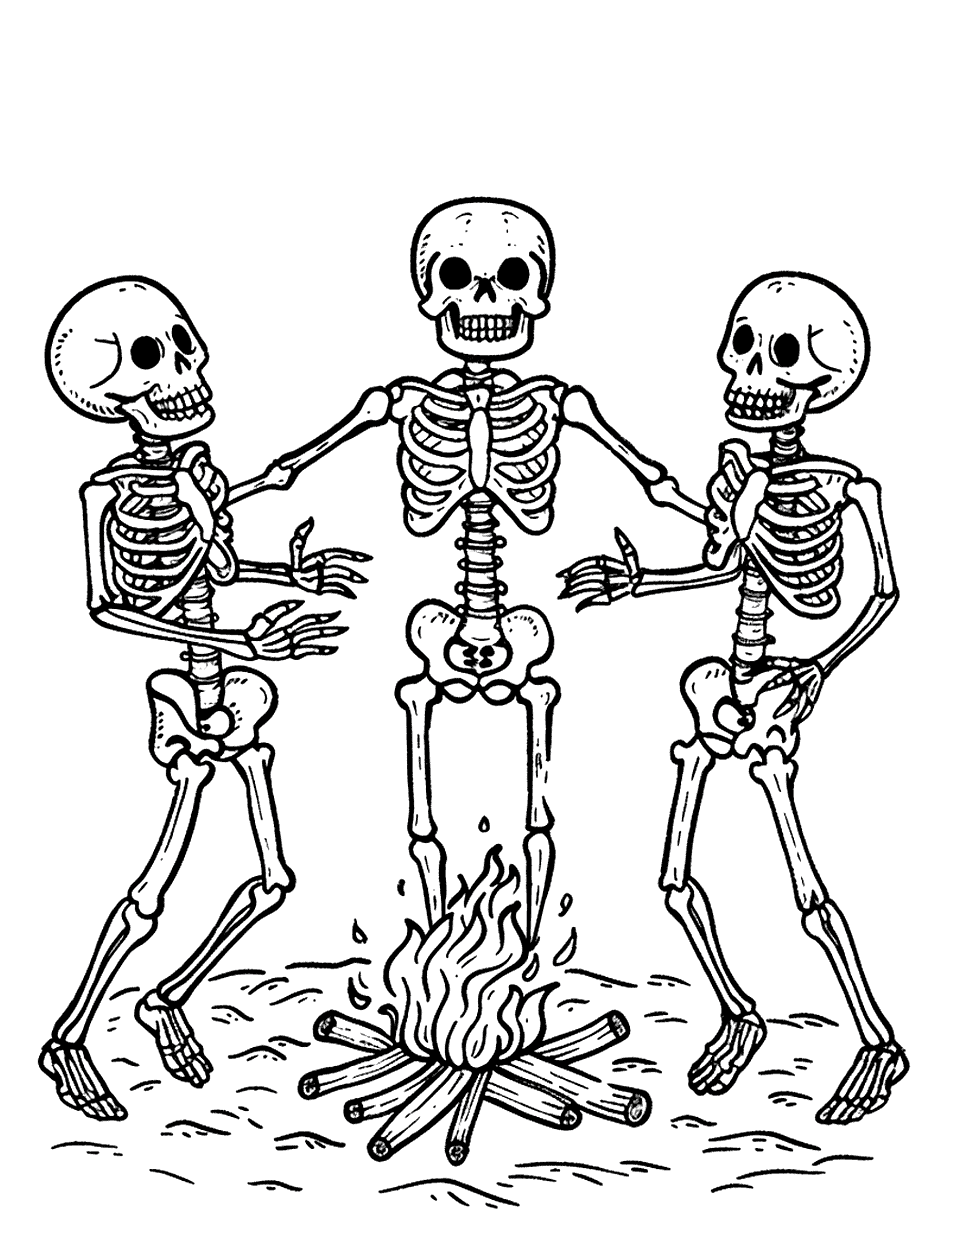 Dancing Skeletons Around a Bonfire Skeleton Coloring Page - A group of skeletons dancing around a bonfire at night.